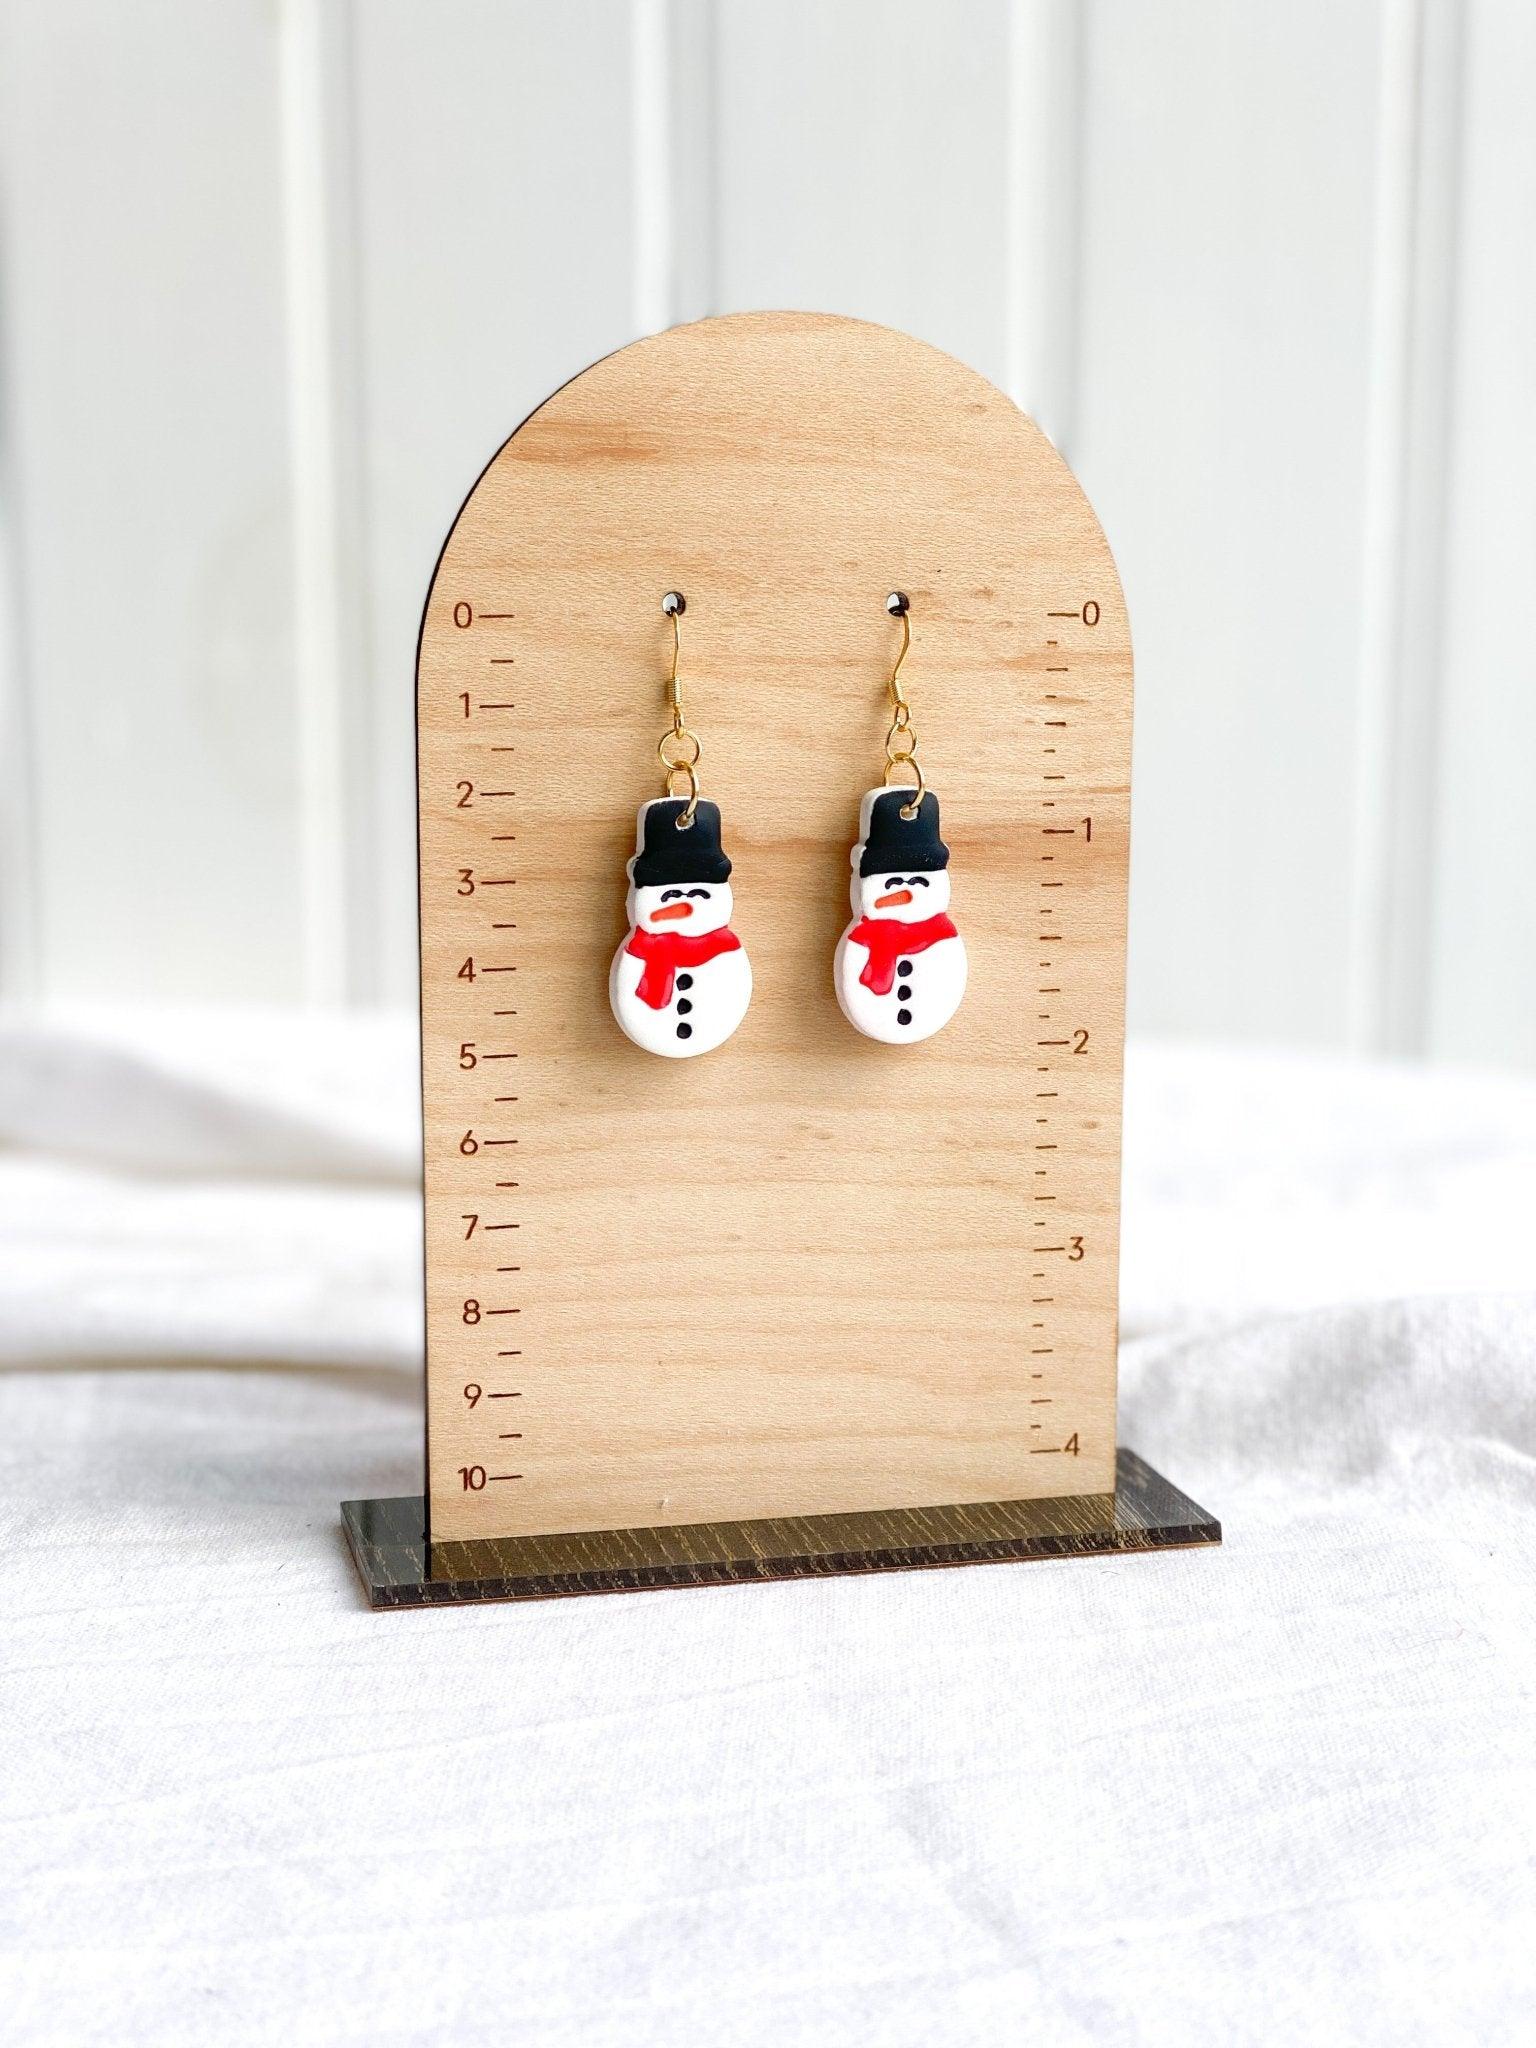 Cute Handmade Clay Snowman Earrings on Gold Ear Wires made from Surgical Steel on wood earring measurement stand